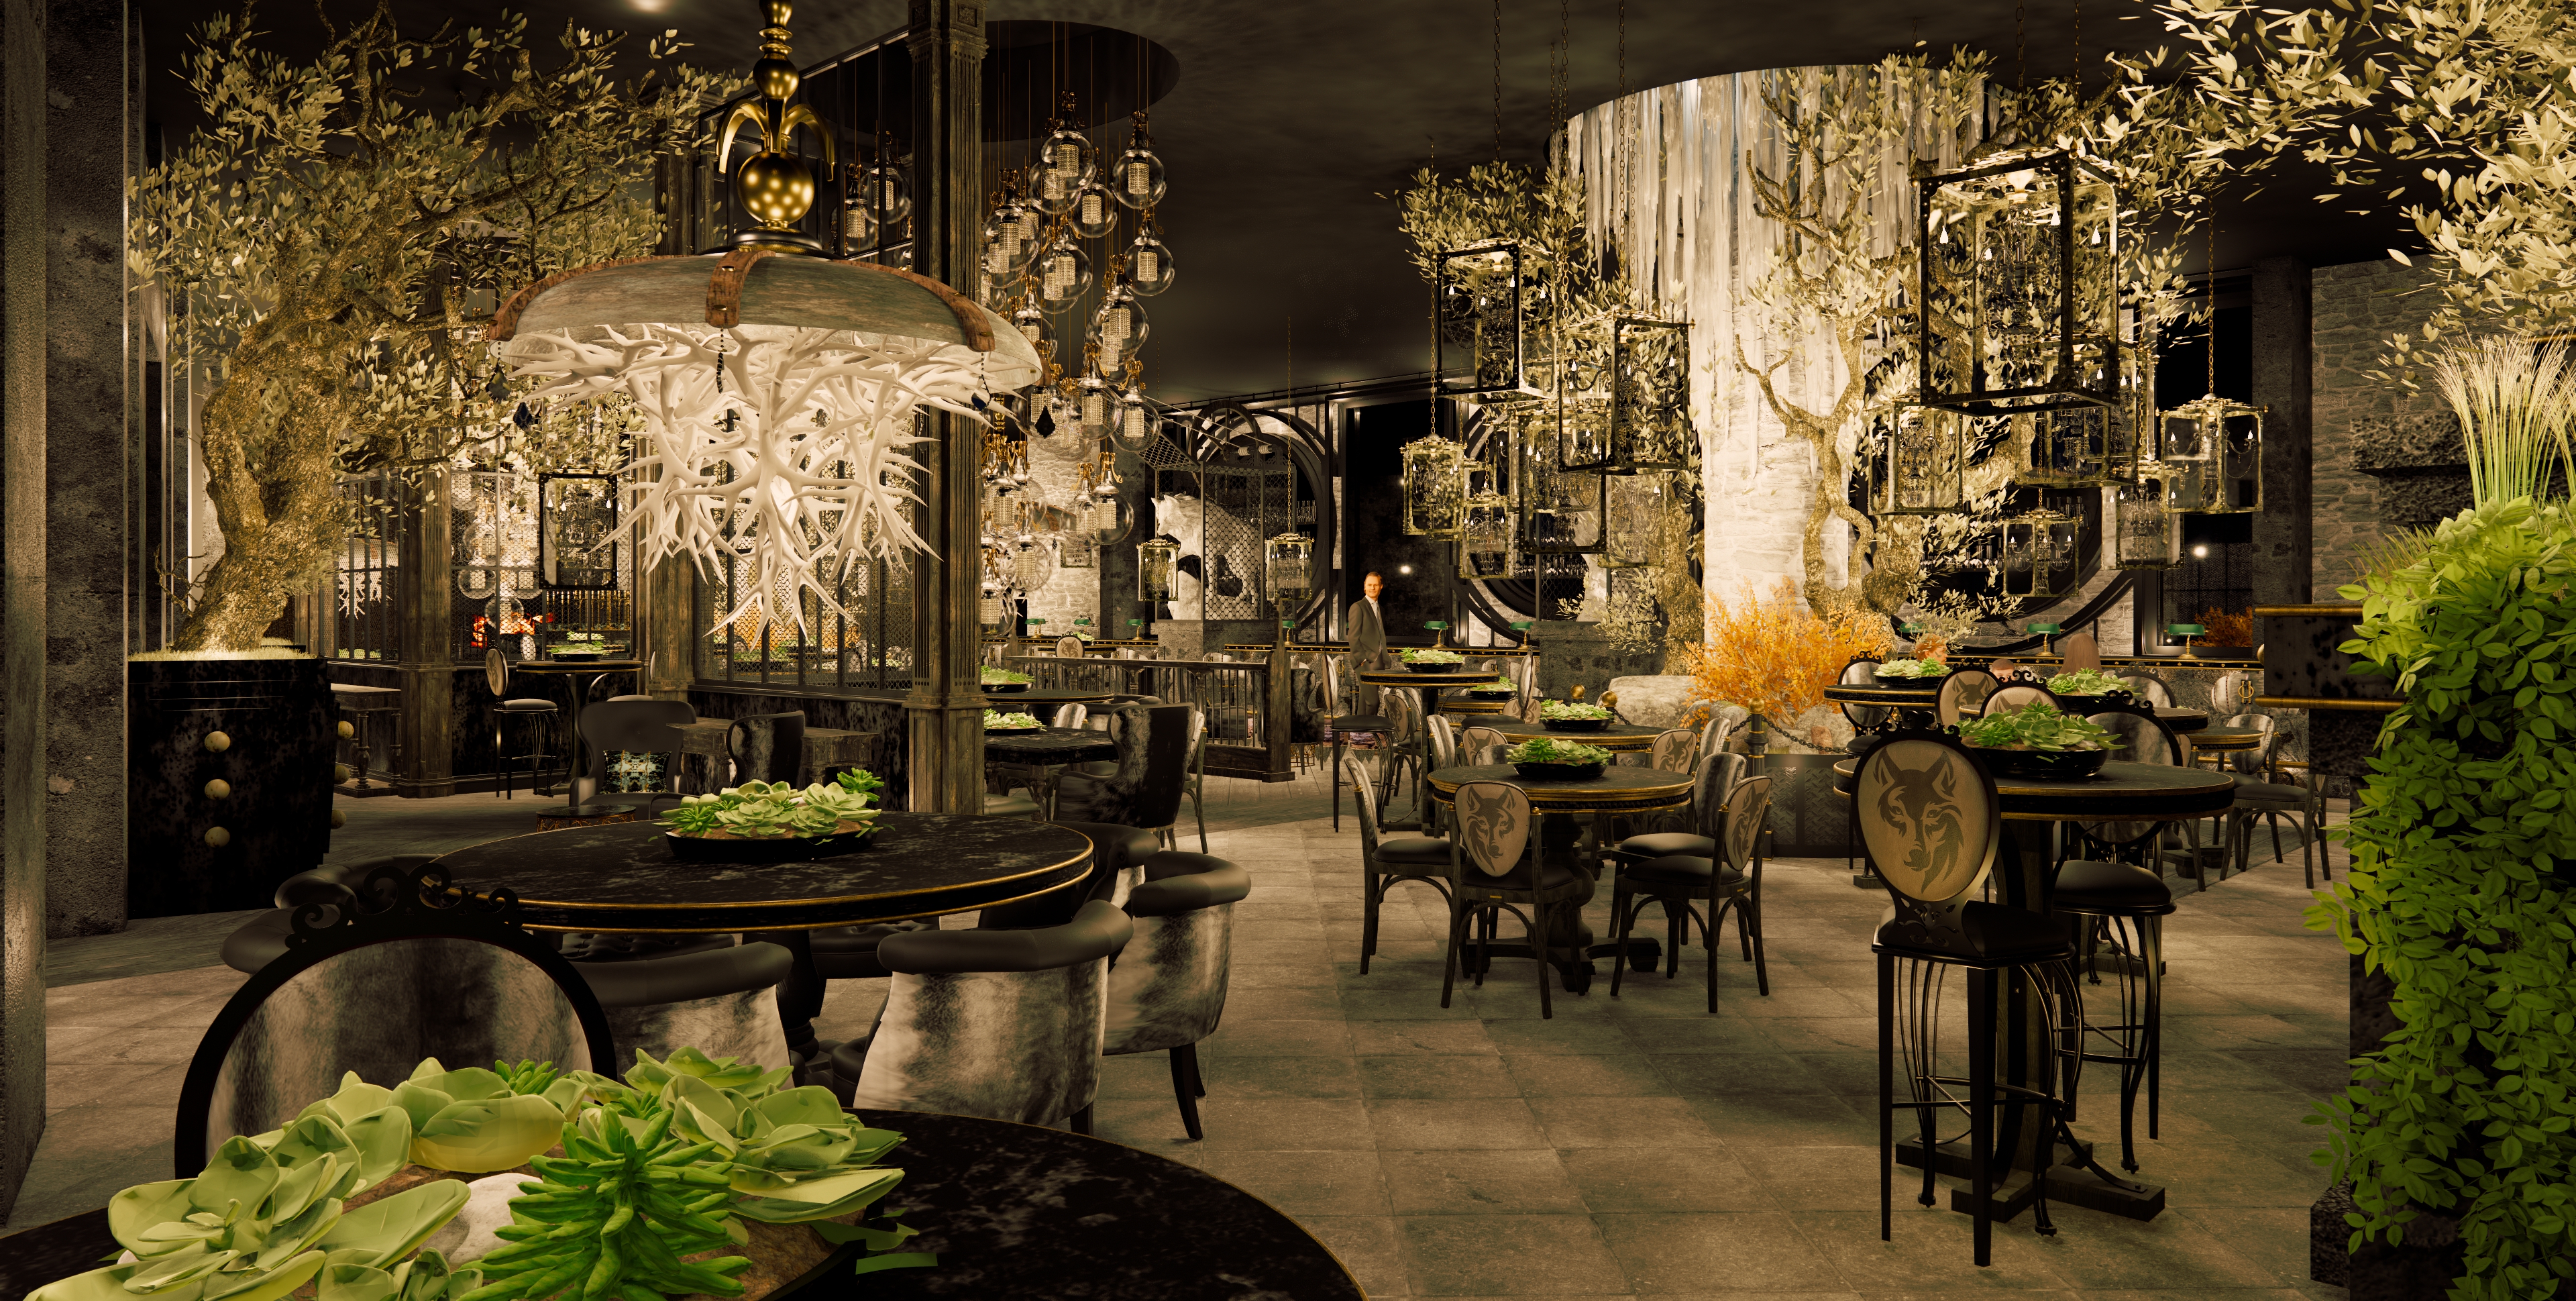 A rendering of a restaurant with elaborate lighting and dark wood furniture.